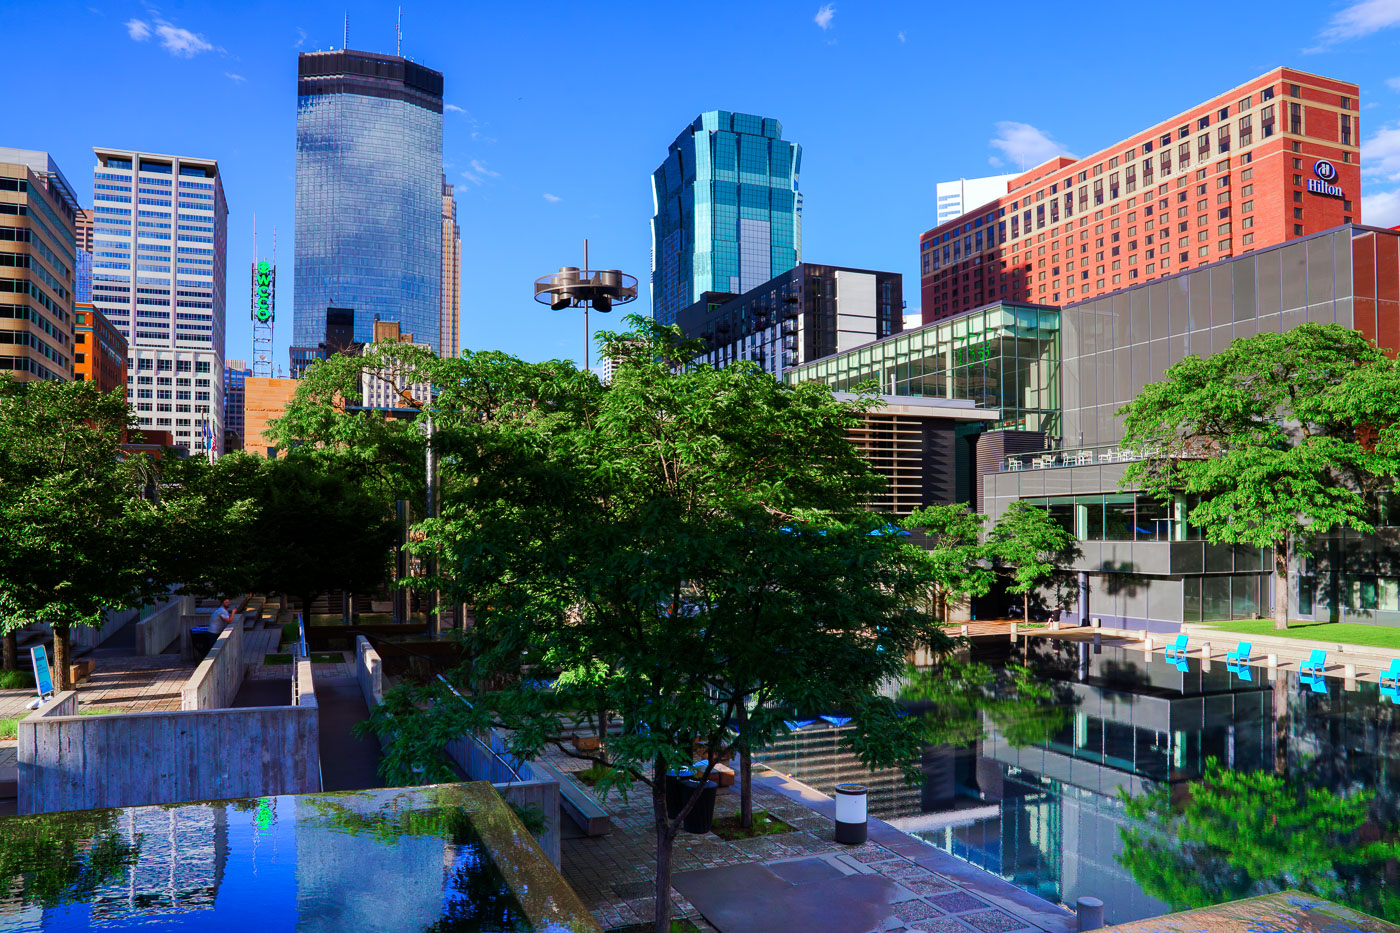 Reflections in Peavey Plaza in downtown Minneapolis